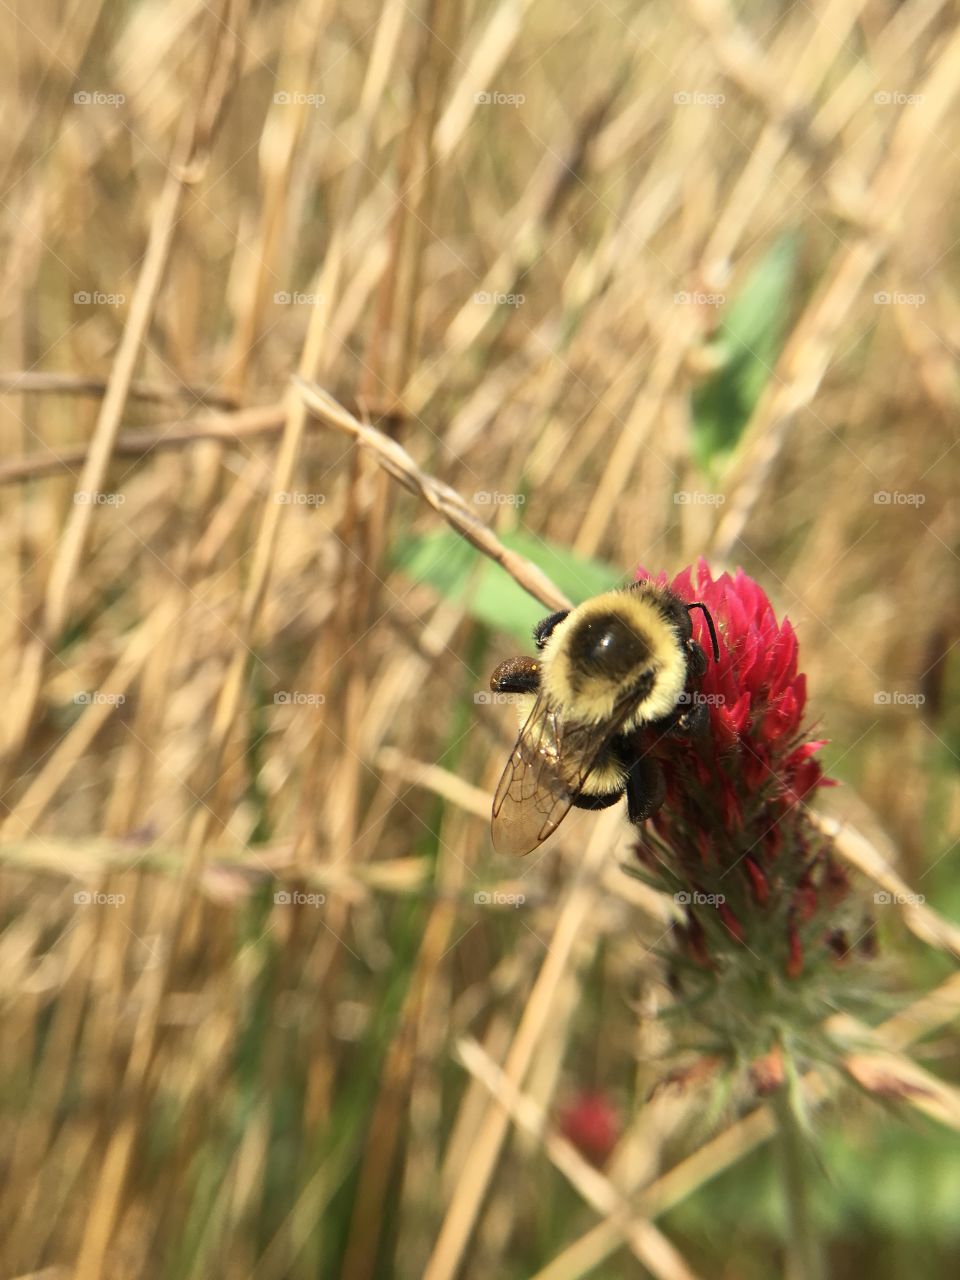 bee collecting pollen in Lee, New Hampshire